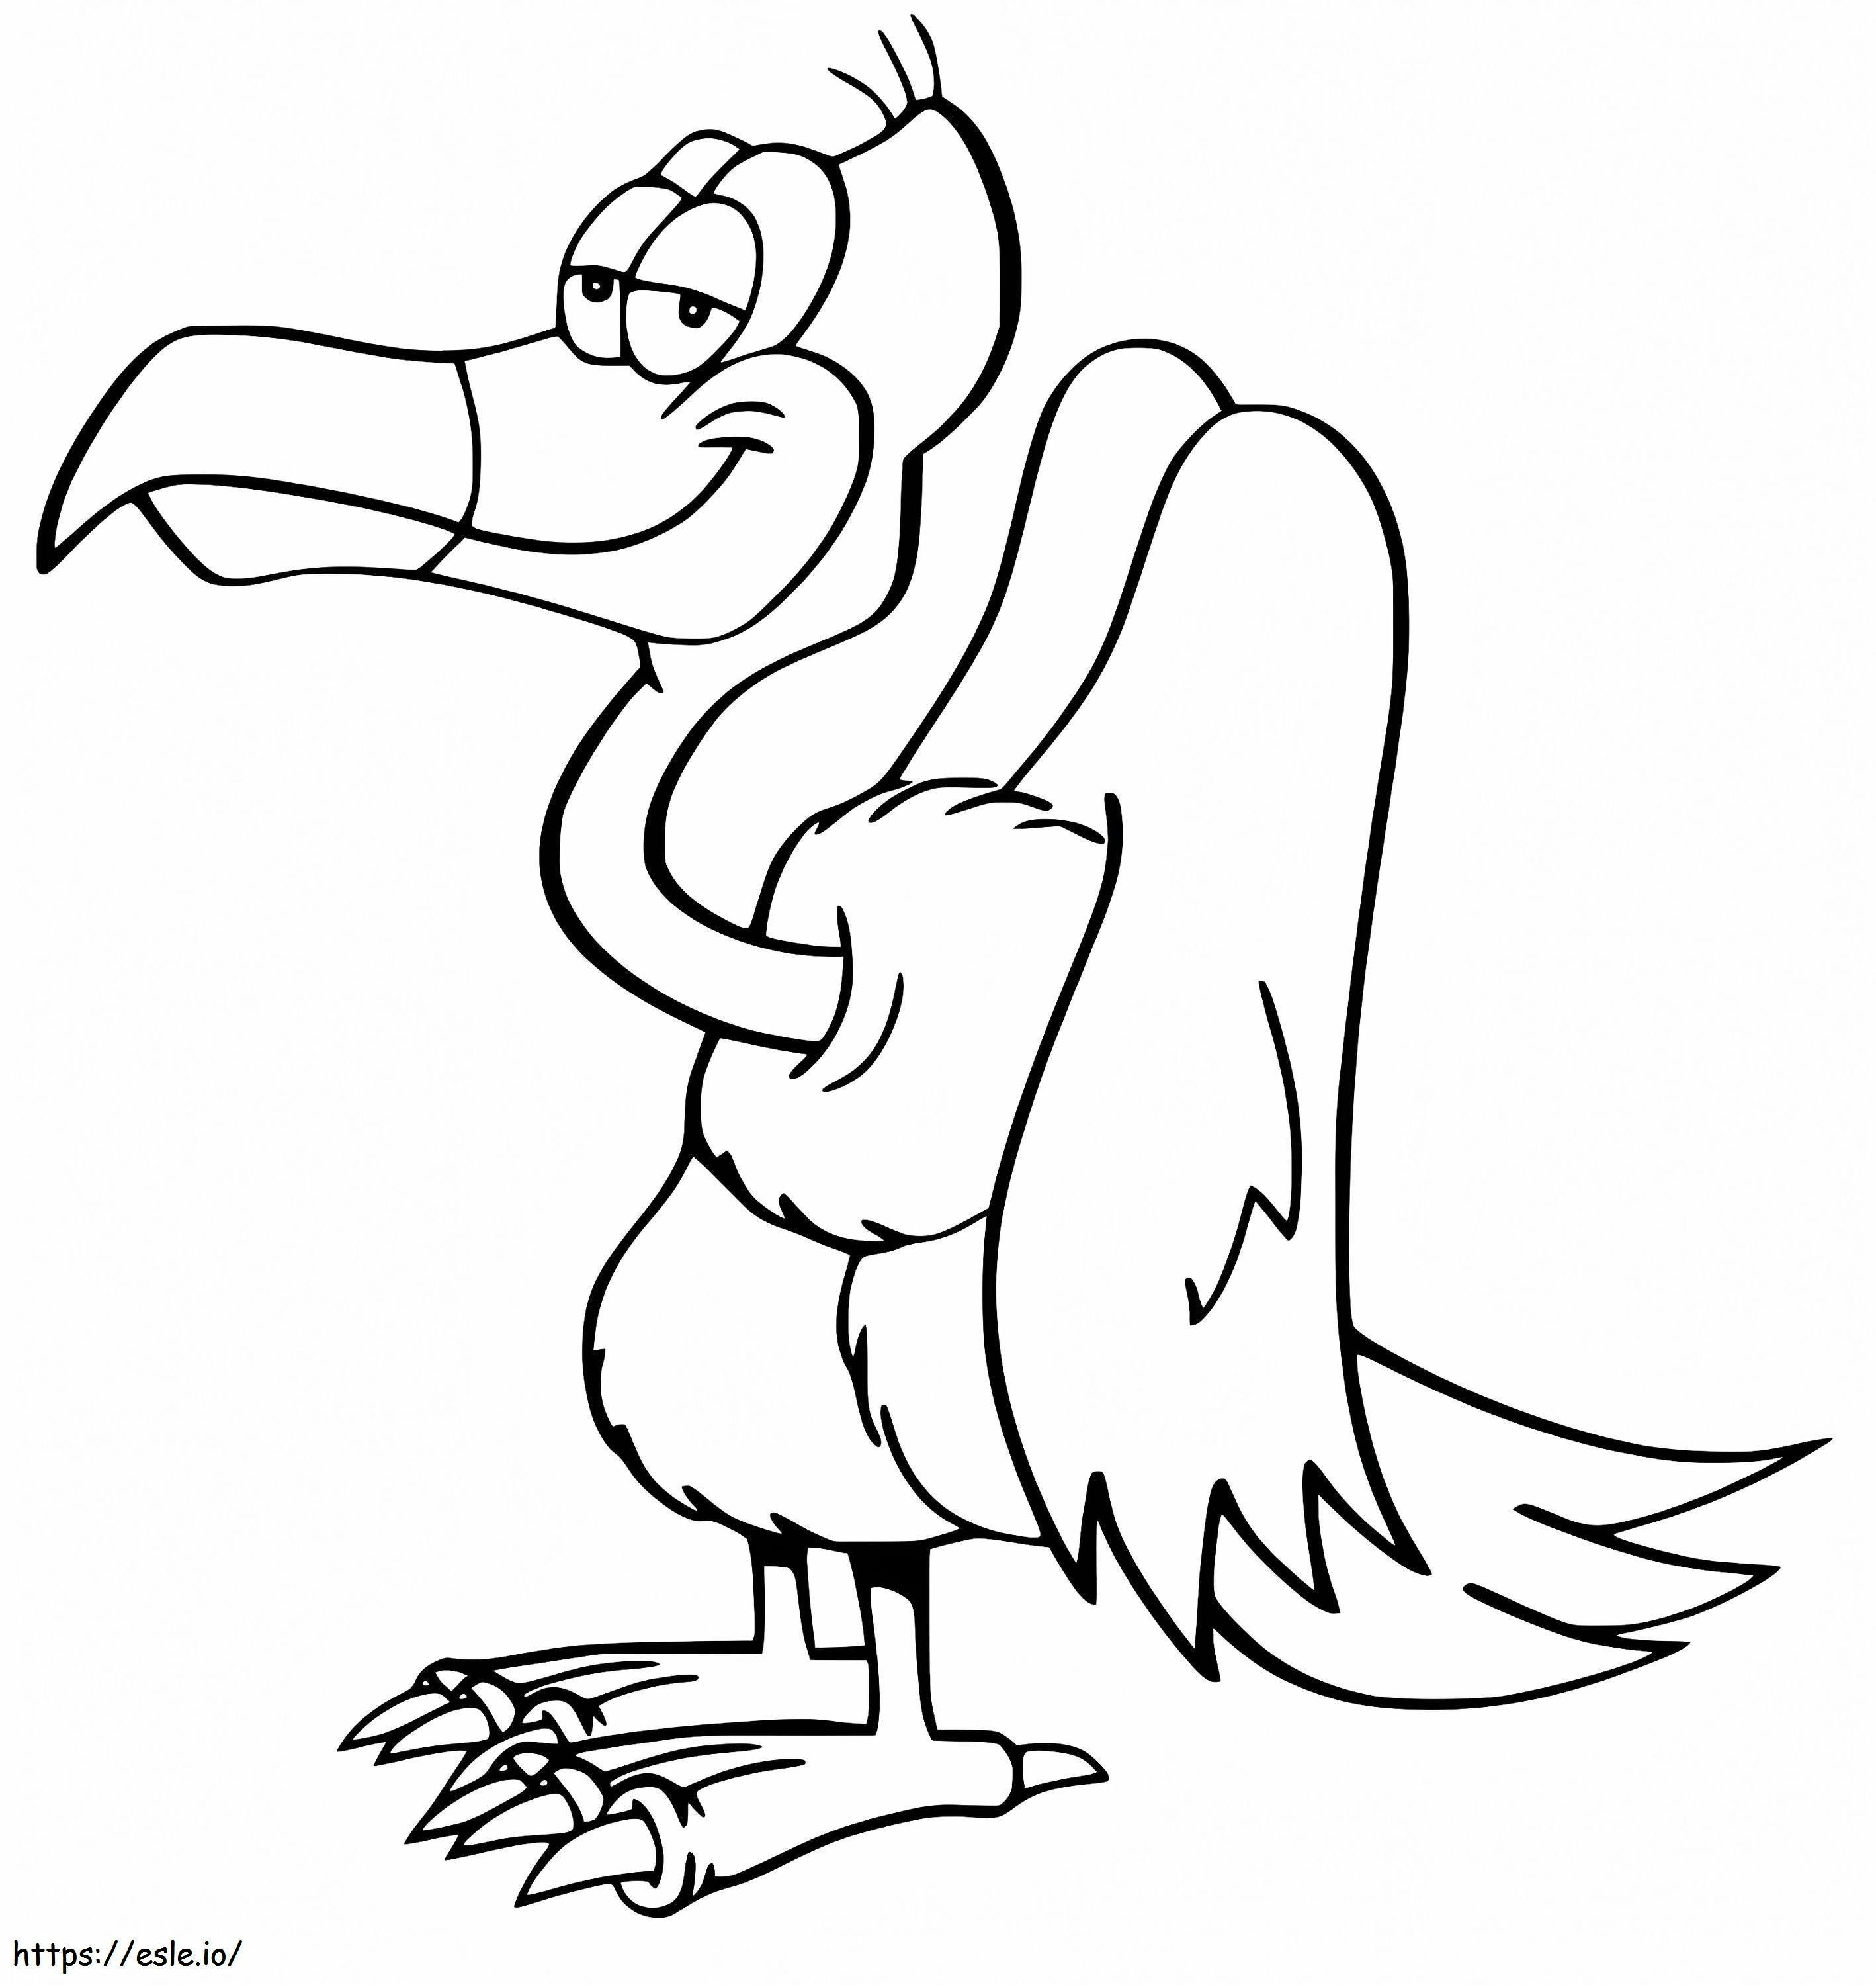 Vulture Smiling coloring page